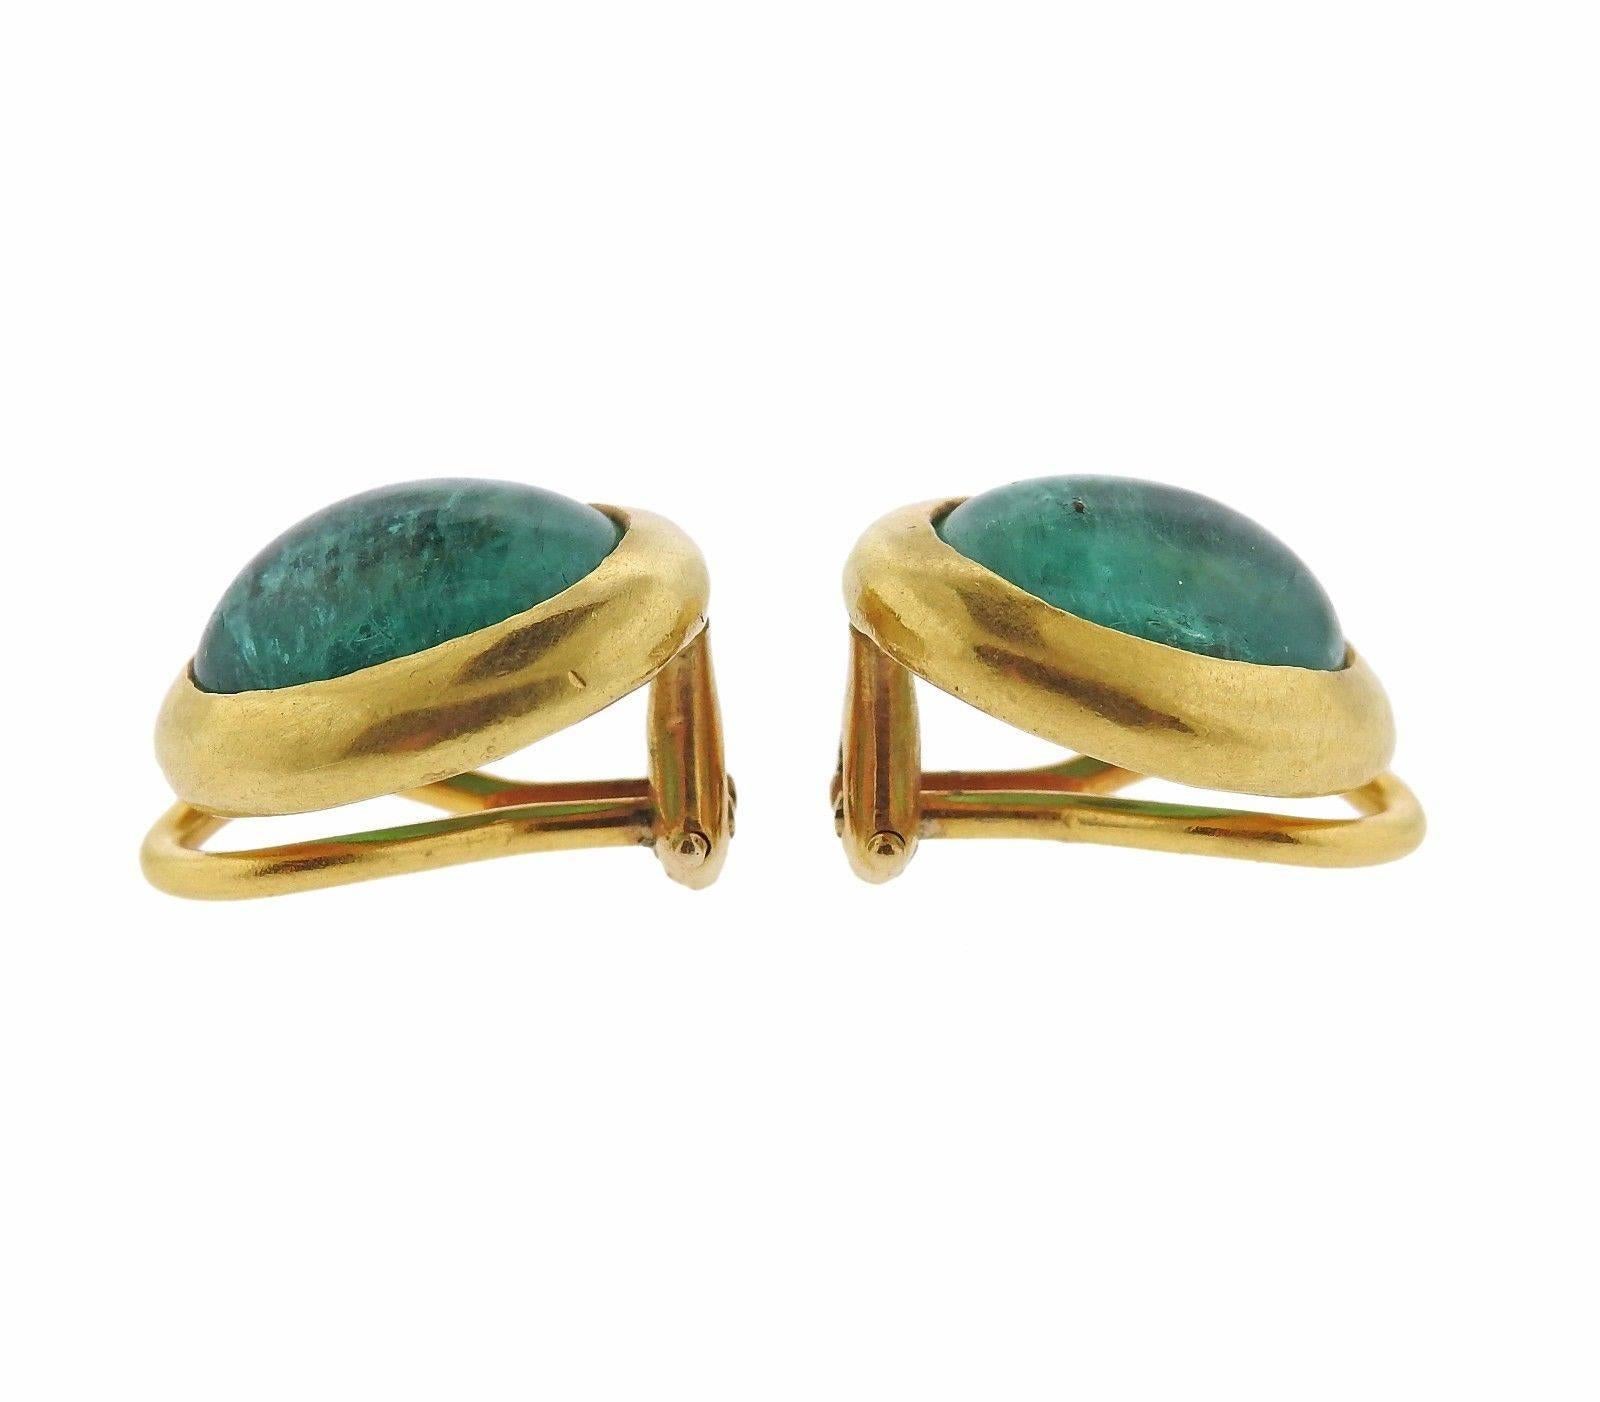 A pair of 22k yellow gold earrings set with emerald cabochons.  The earrings measure 14.4mm x 12.5mm and weigh 8.8 grams.  Marked: XXII, Au, Maker's mark.